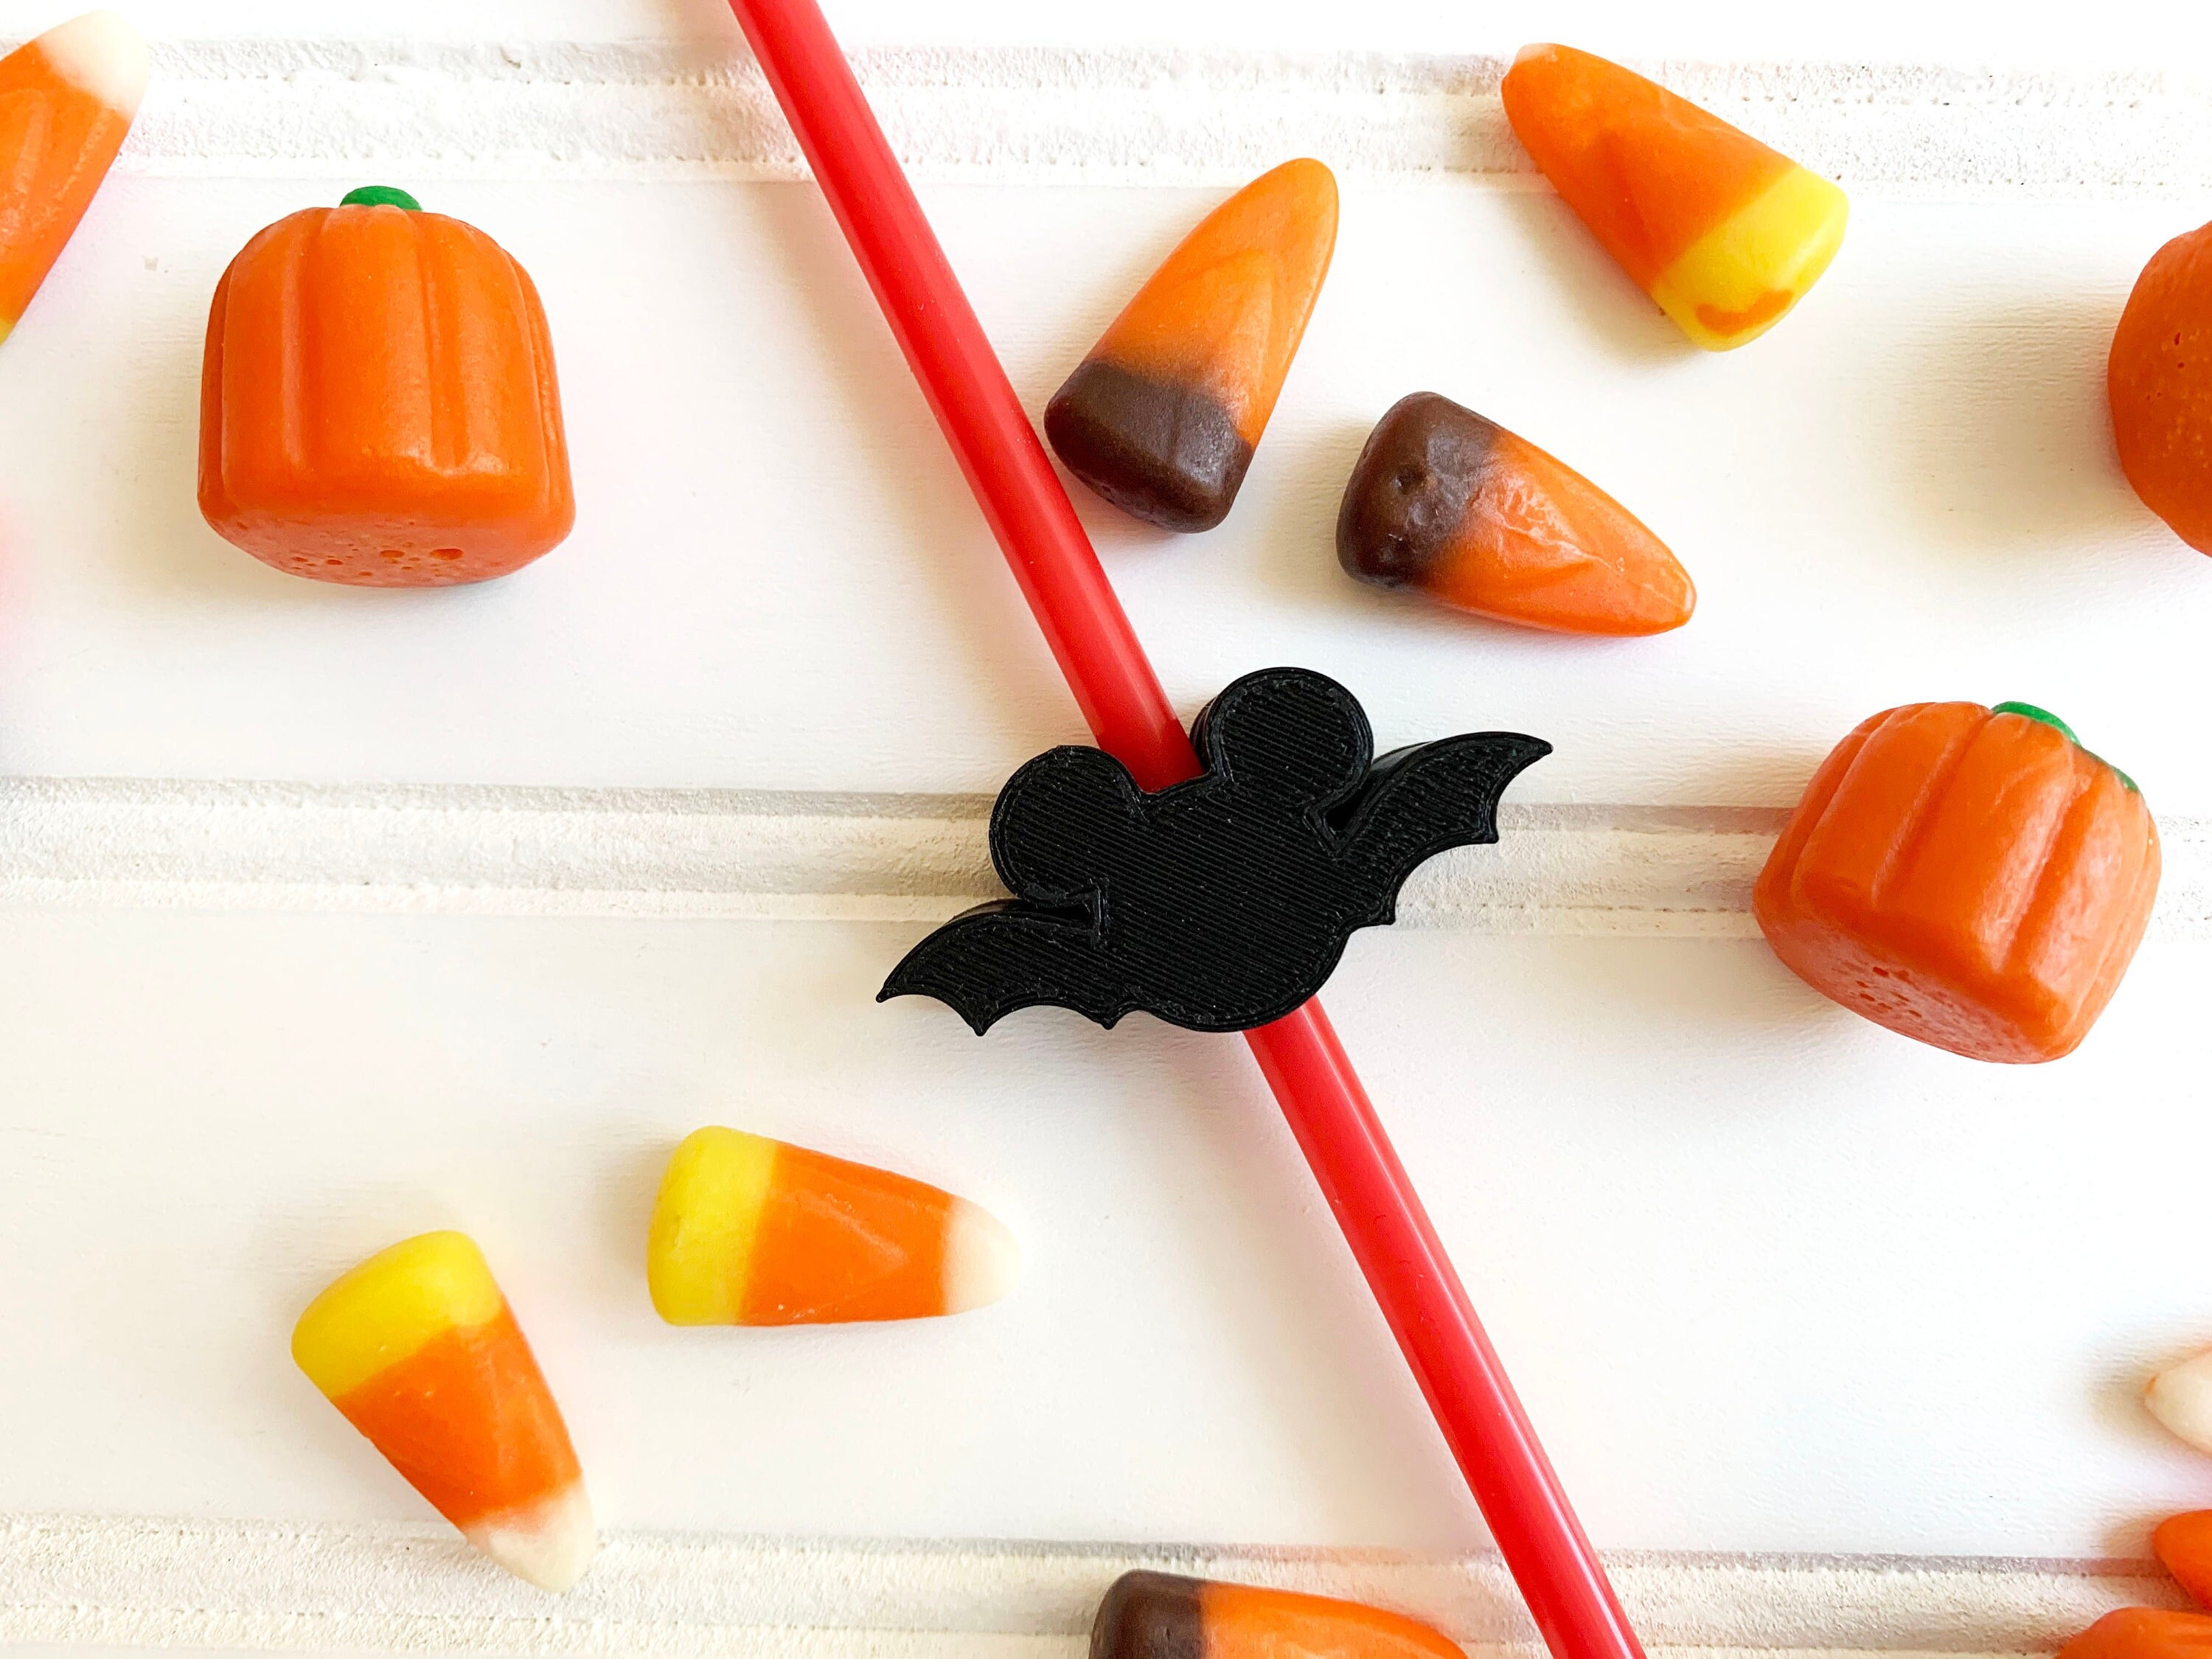 We have a new product in the shop! Mickey Bat straw toppers